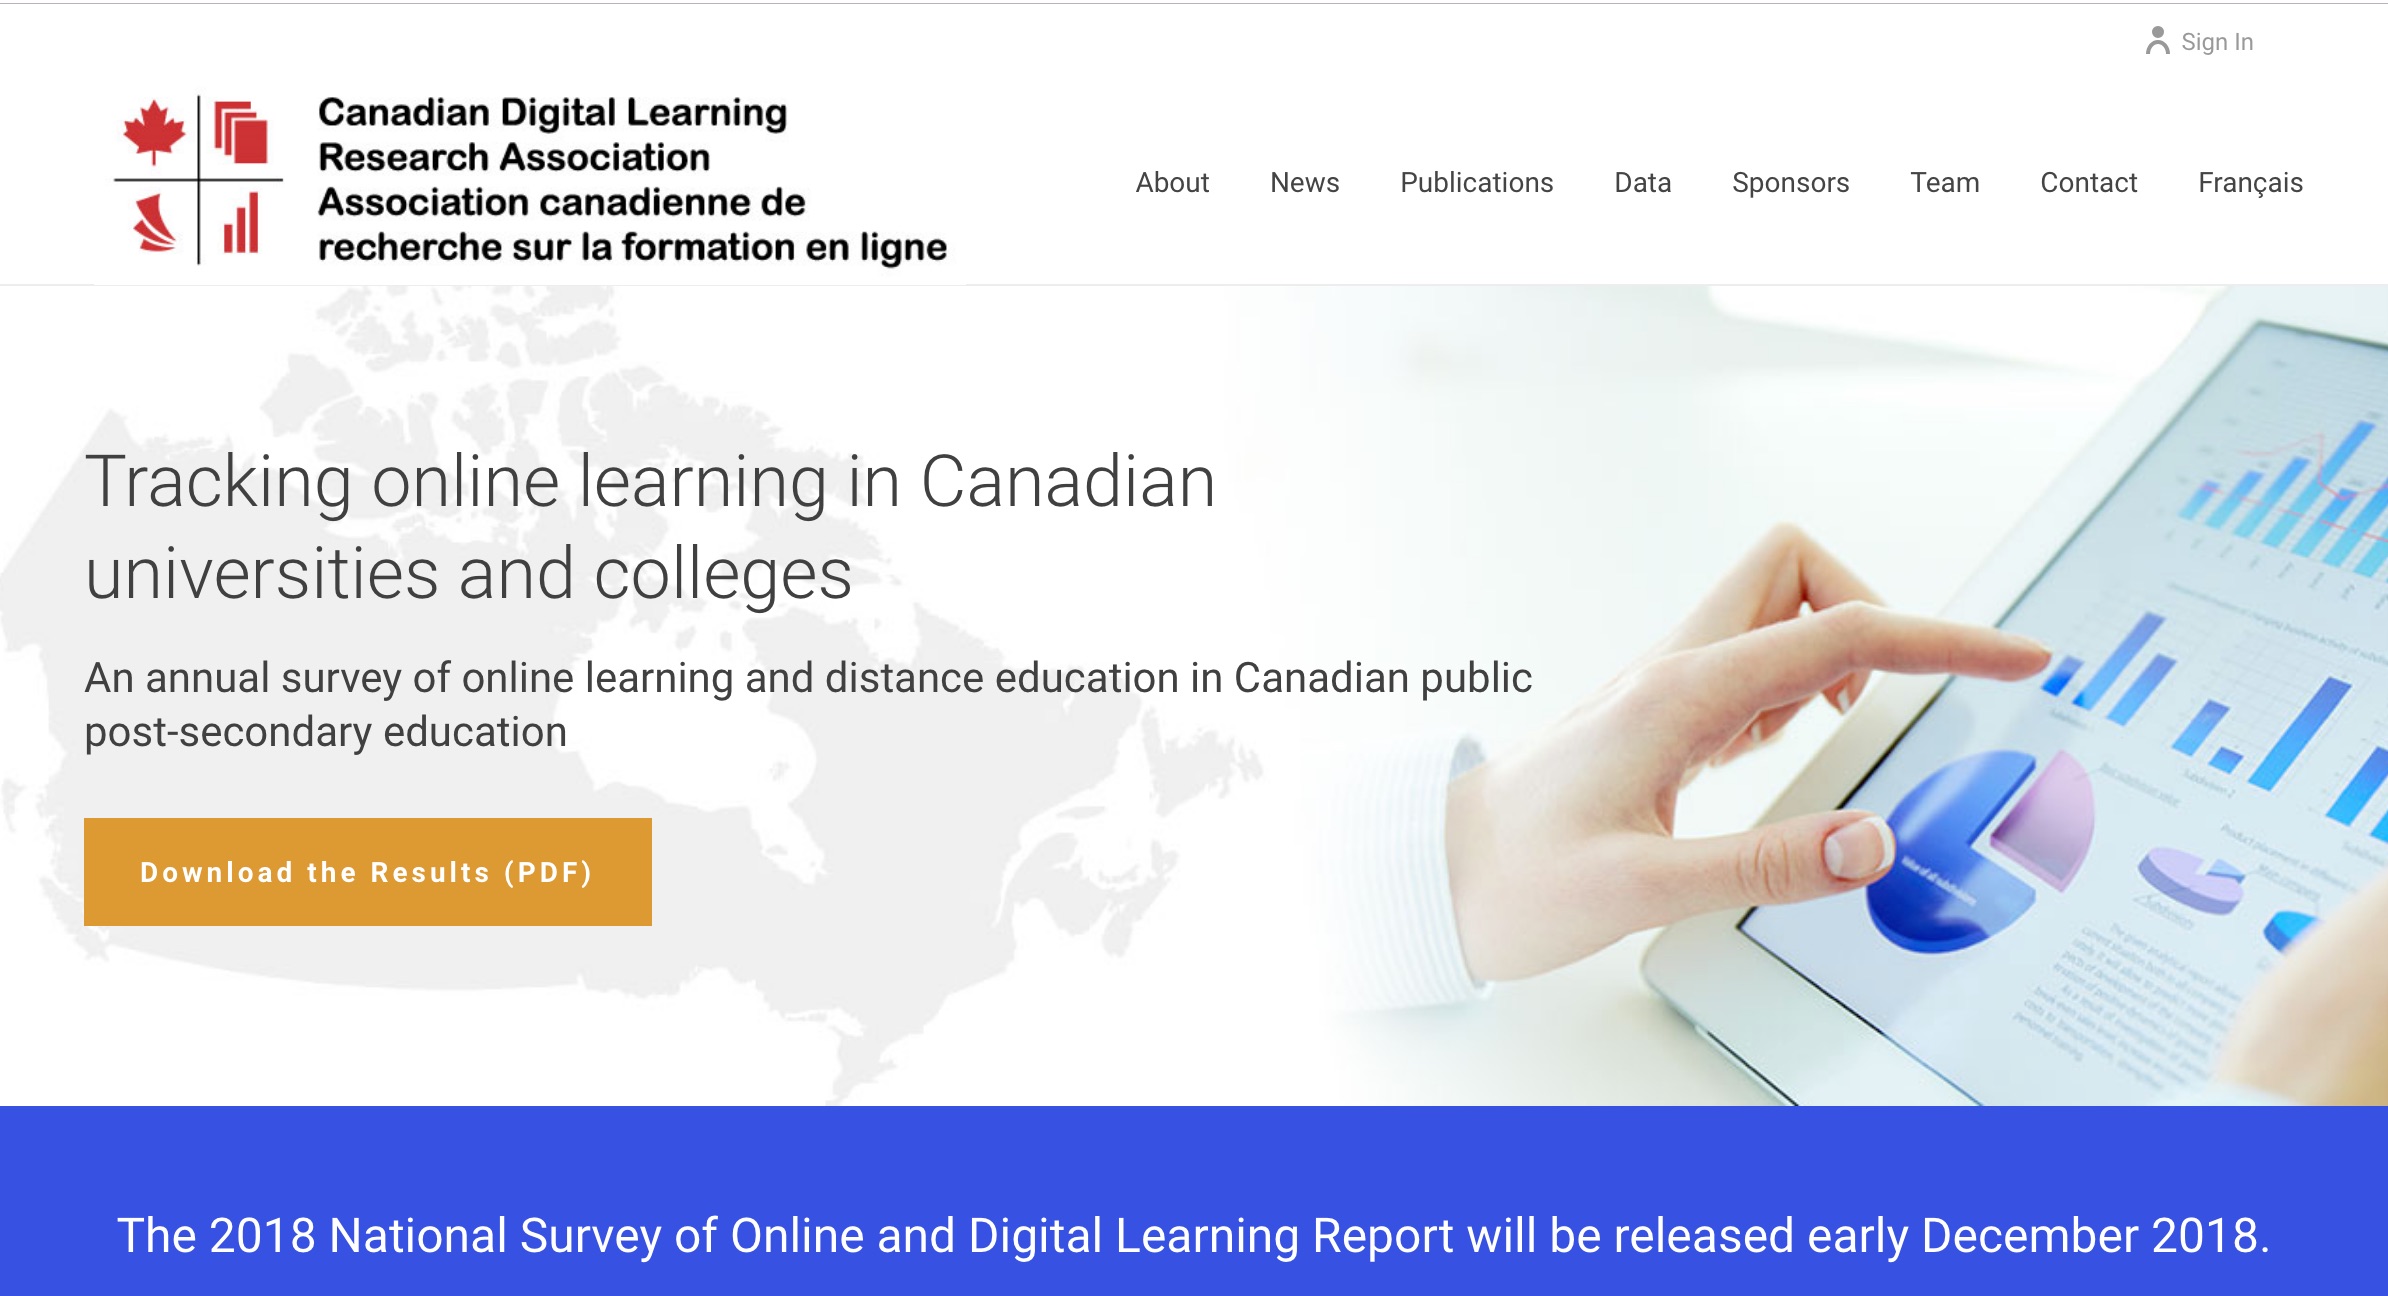 New Enrolment Data For Online Learning In Canadian Universities